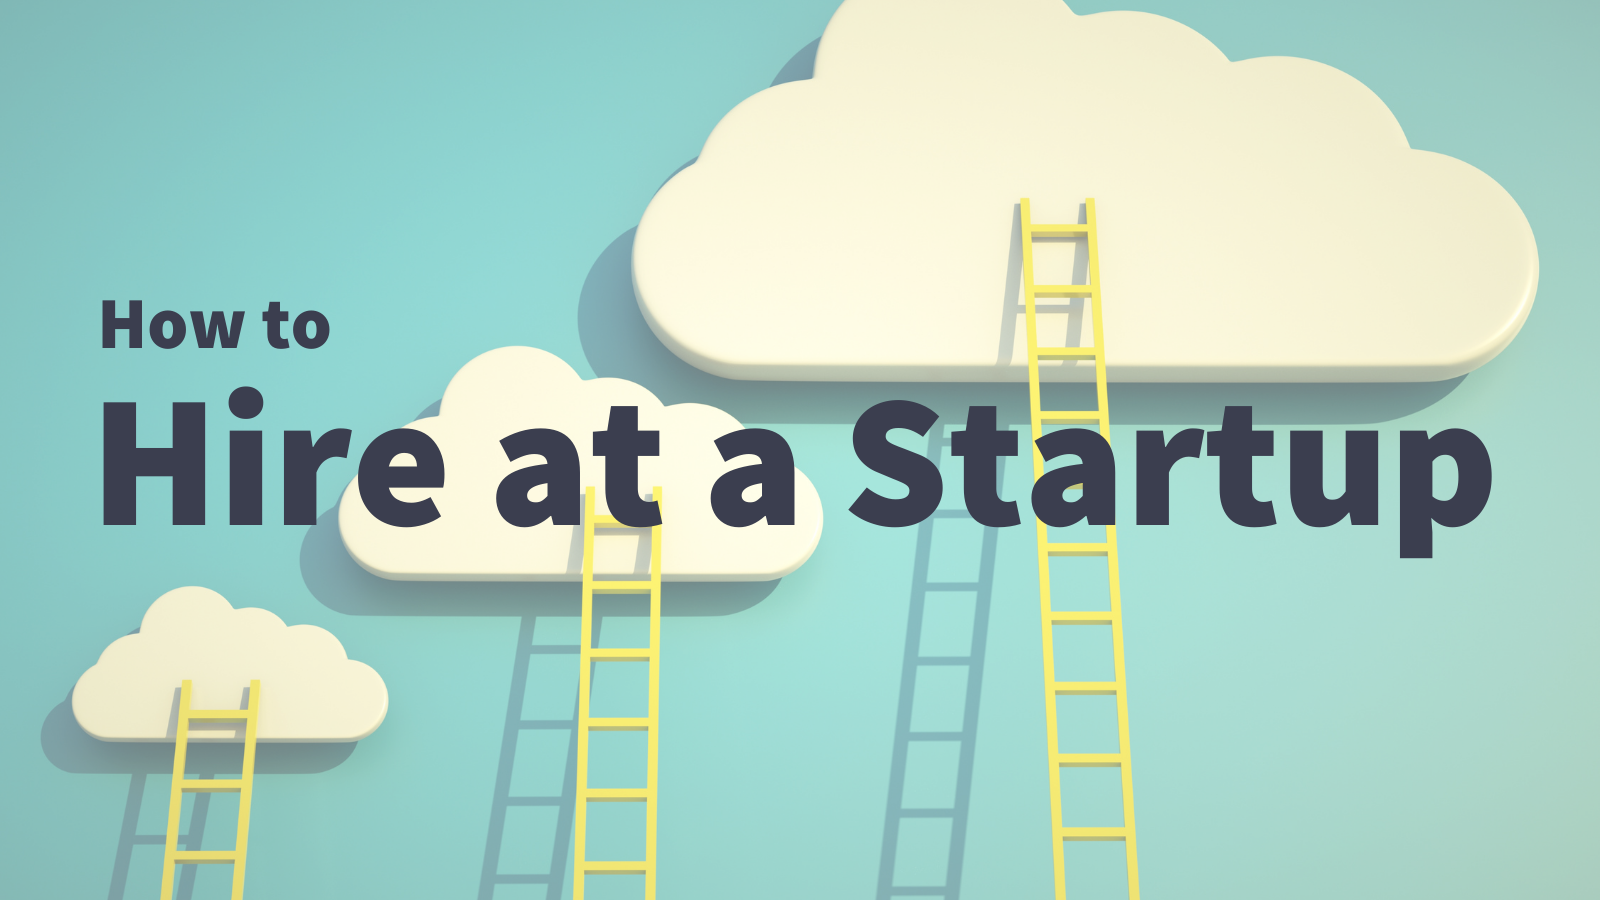 How to Hire at a Startup